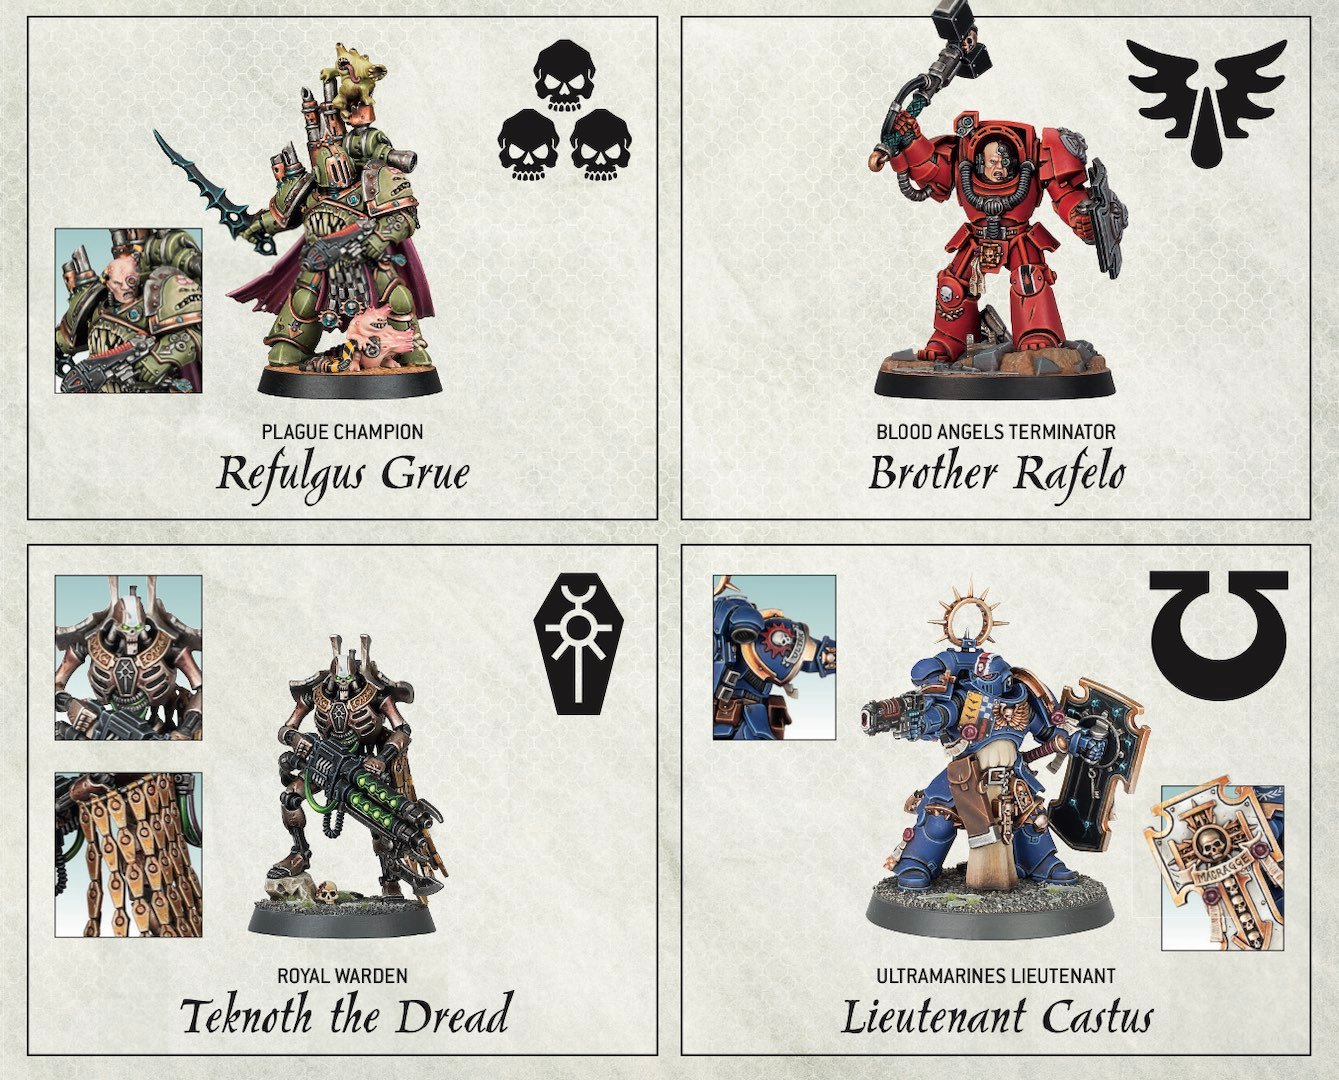 A depiction of the four warriors in the Warhammer Board Game Combat Arena: Clash of Champions